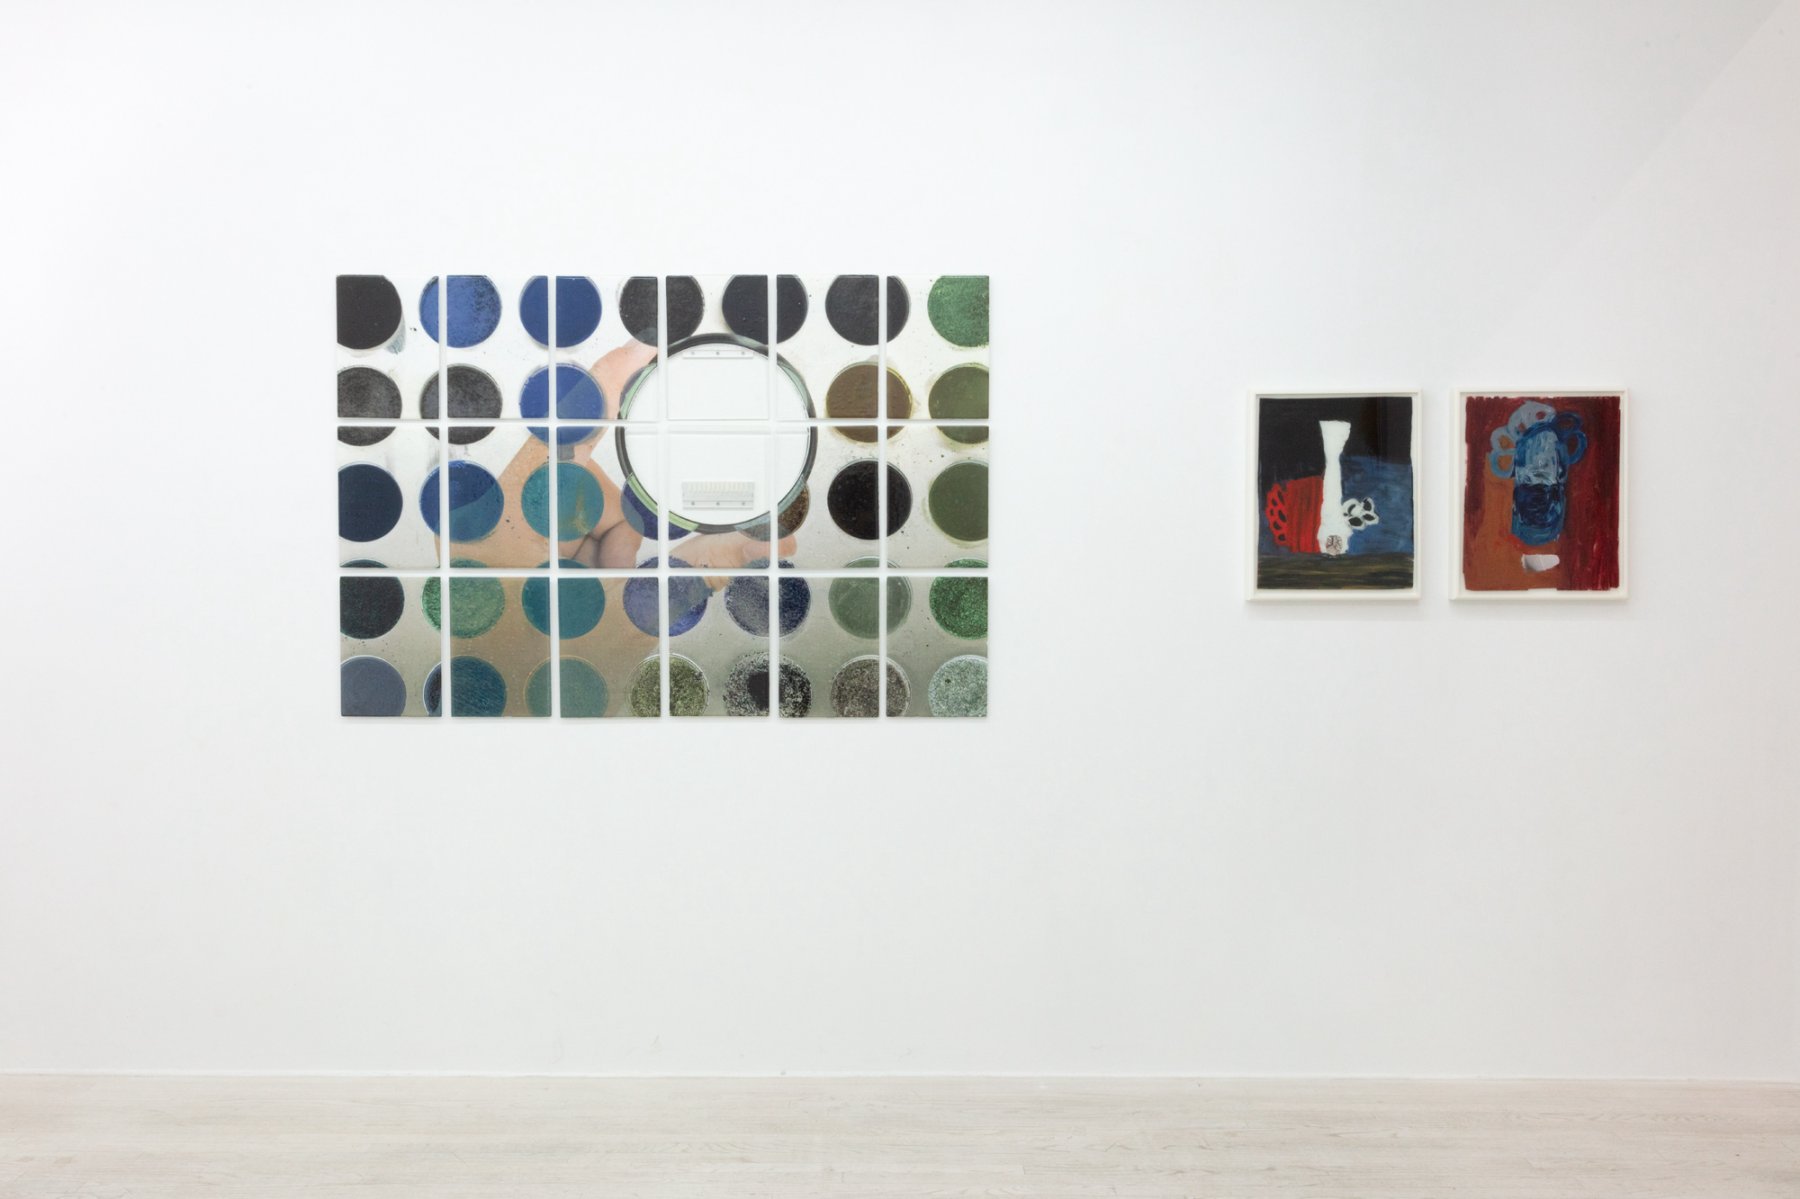 Installation image for The Glass Show, at Halsey McKay Gallery